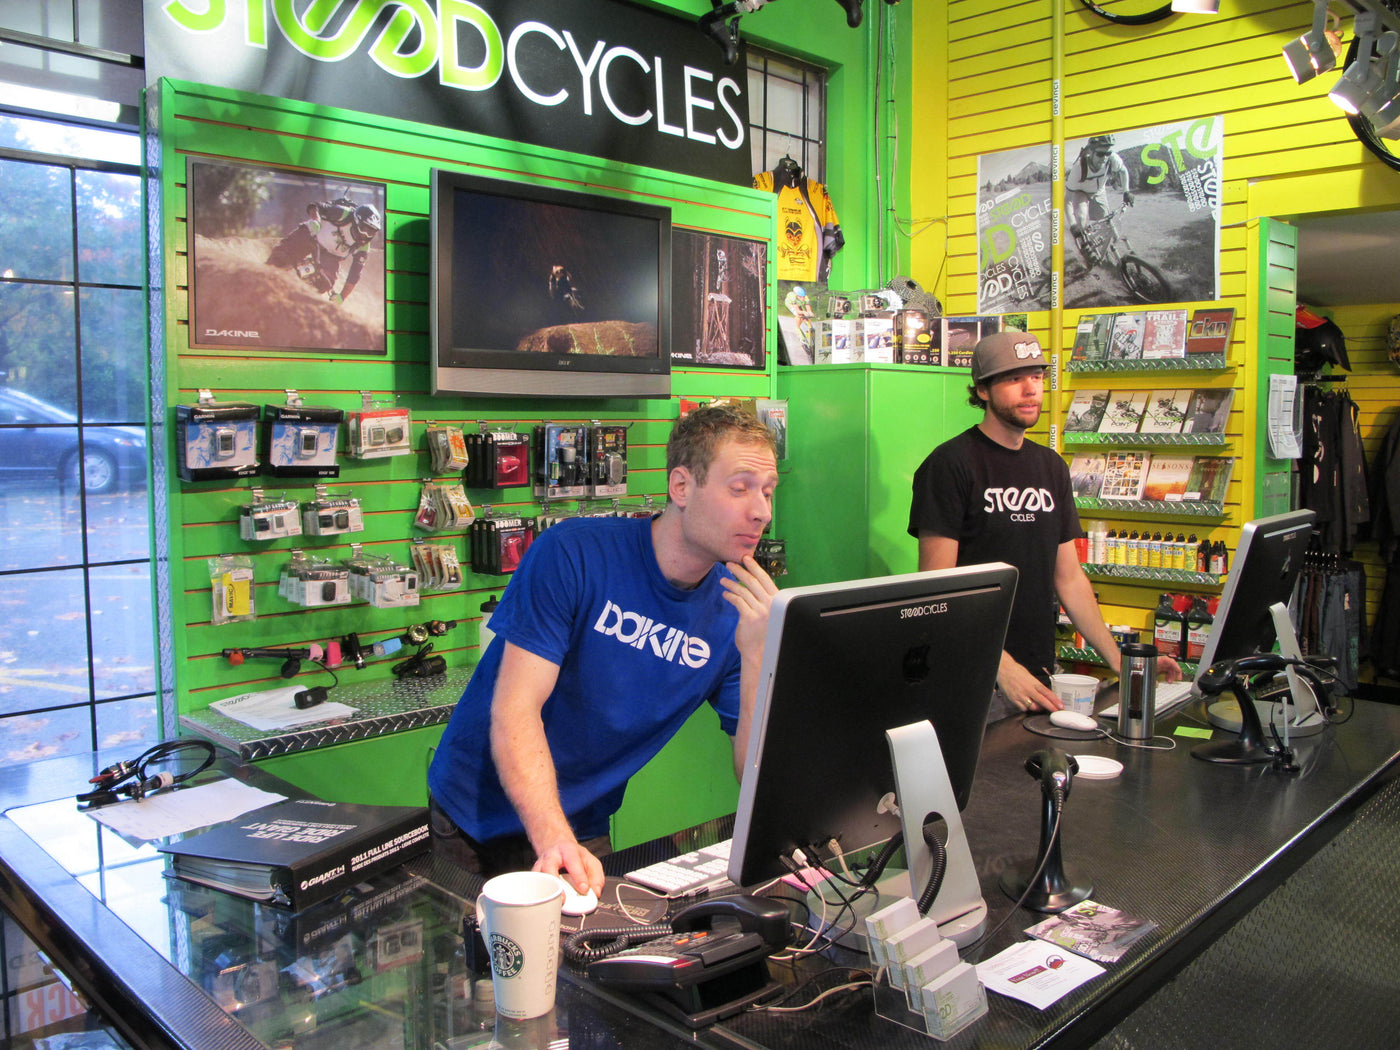 Podcast Episode 21 - Scott Pilecki and Tristan Olk Turn Back the Clock and Chat Steed Cycles and North Shore History